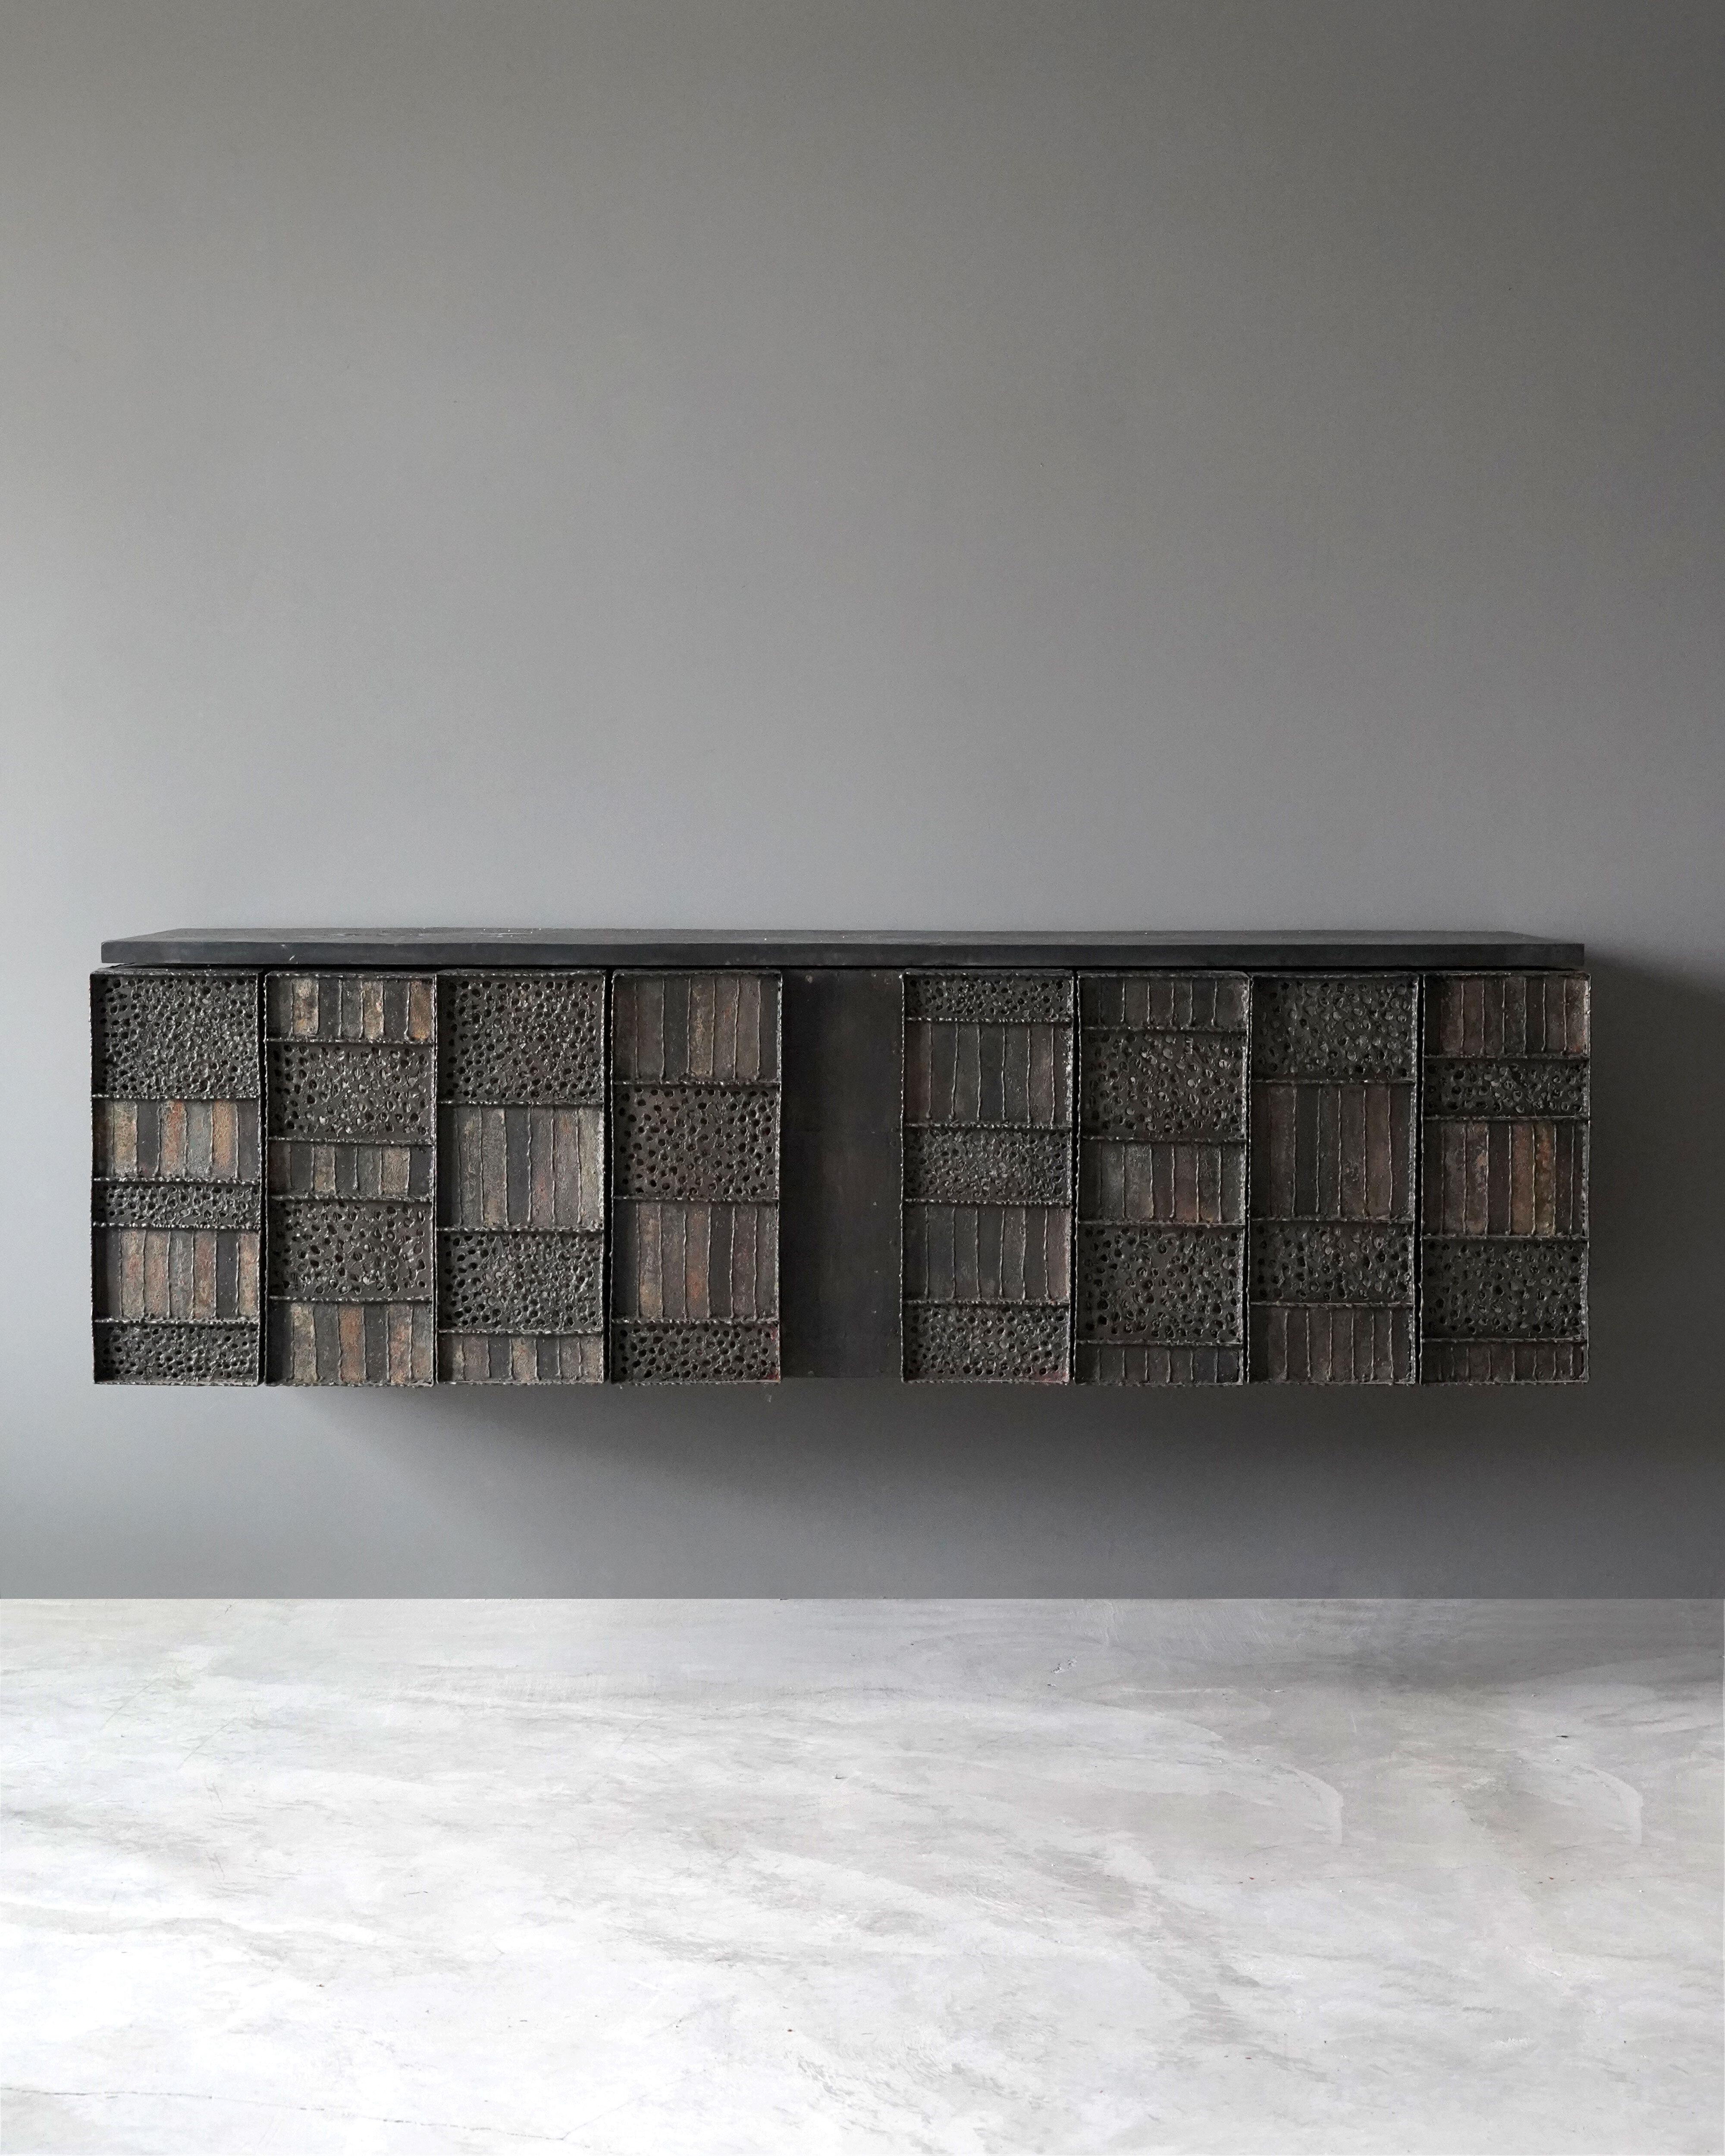 A rare wall-mounted cabinet. Designed and produced by Paul Evans in his studio, New Hope, Pennsylvania, America. Features welded, perforated, and hand-painted steel over wood, original slate top. 

Production of this model cabinet started in 1962